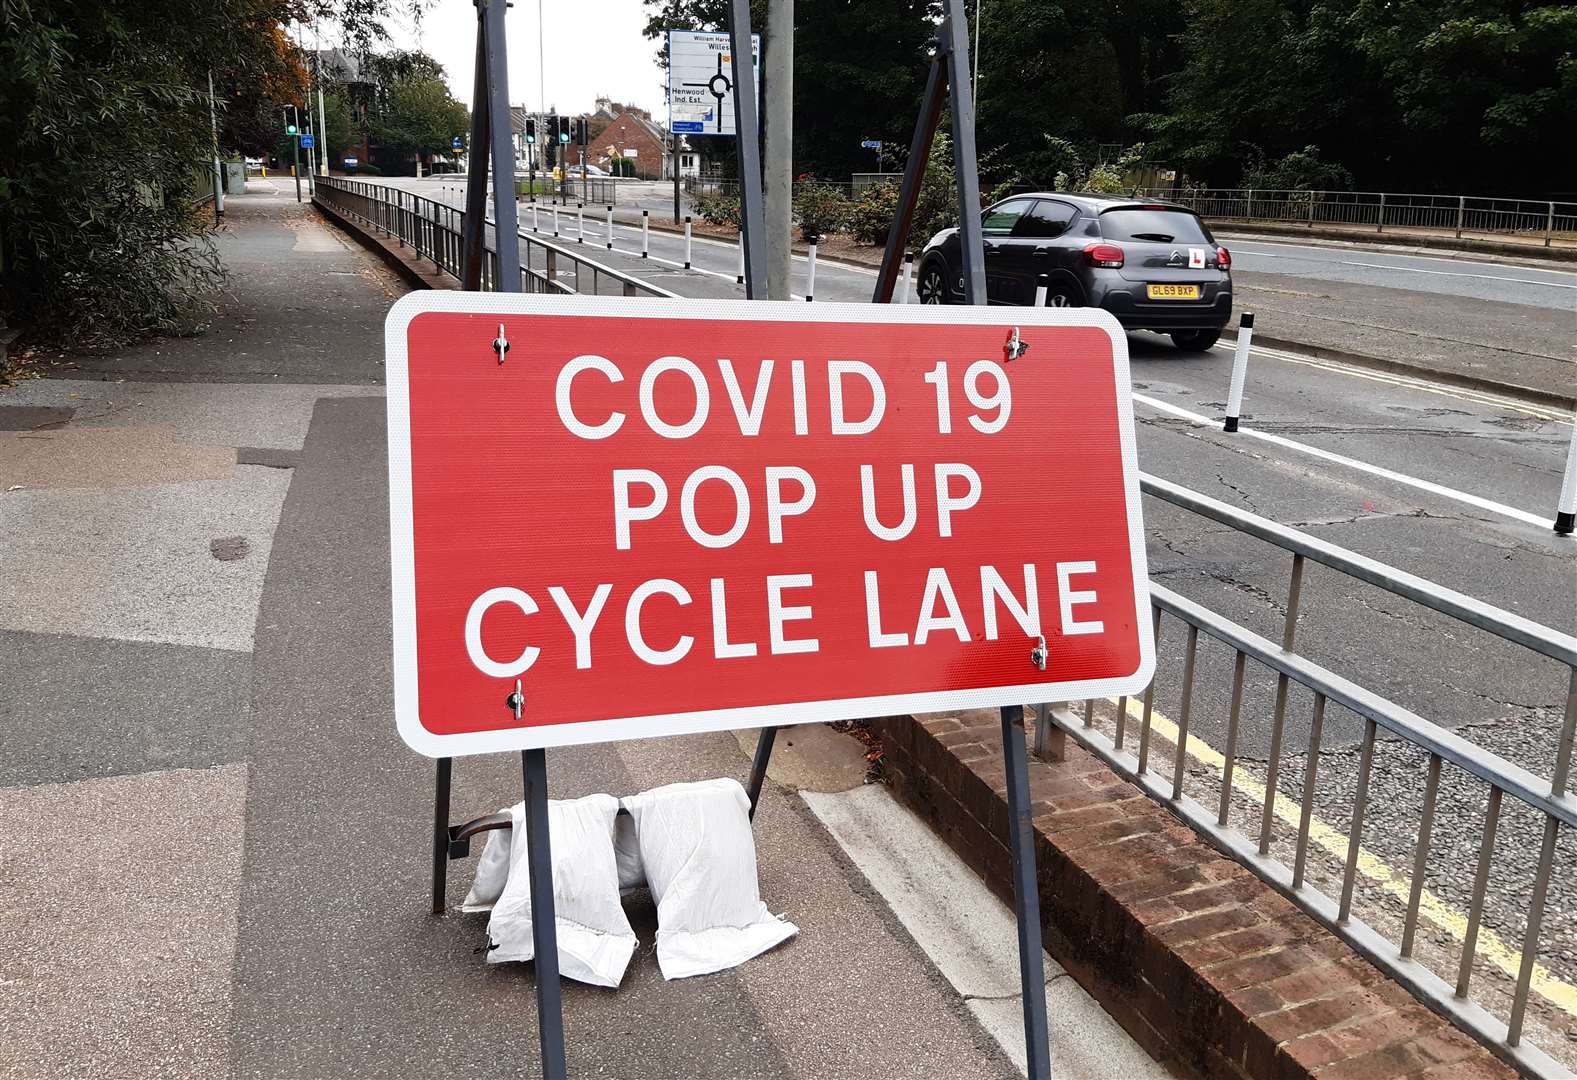 The Covid-19 pop-up cycle lanes proved controversial